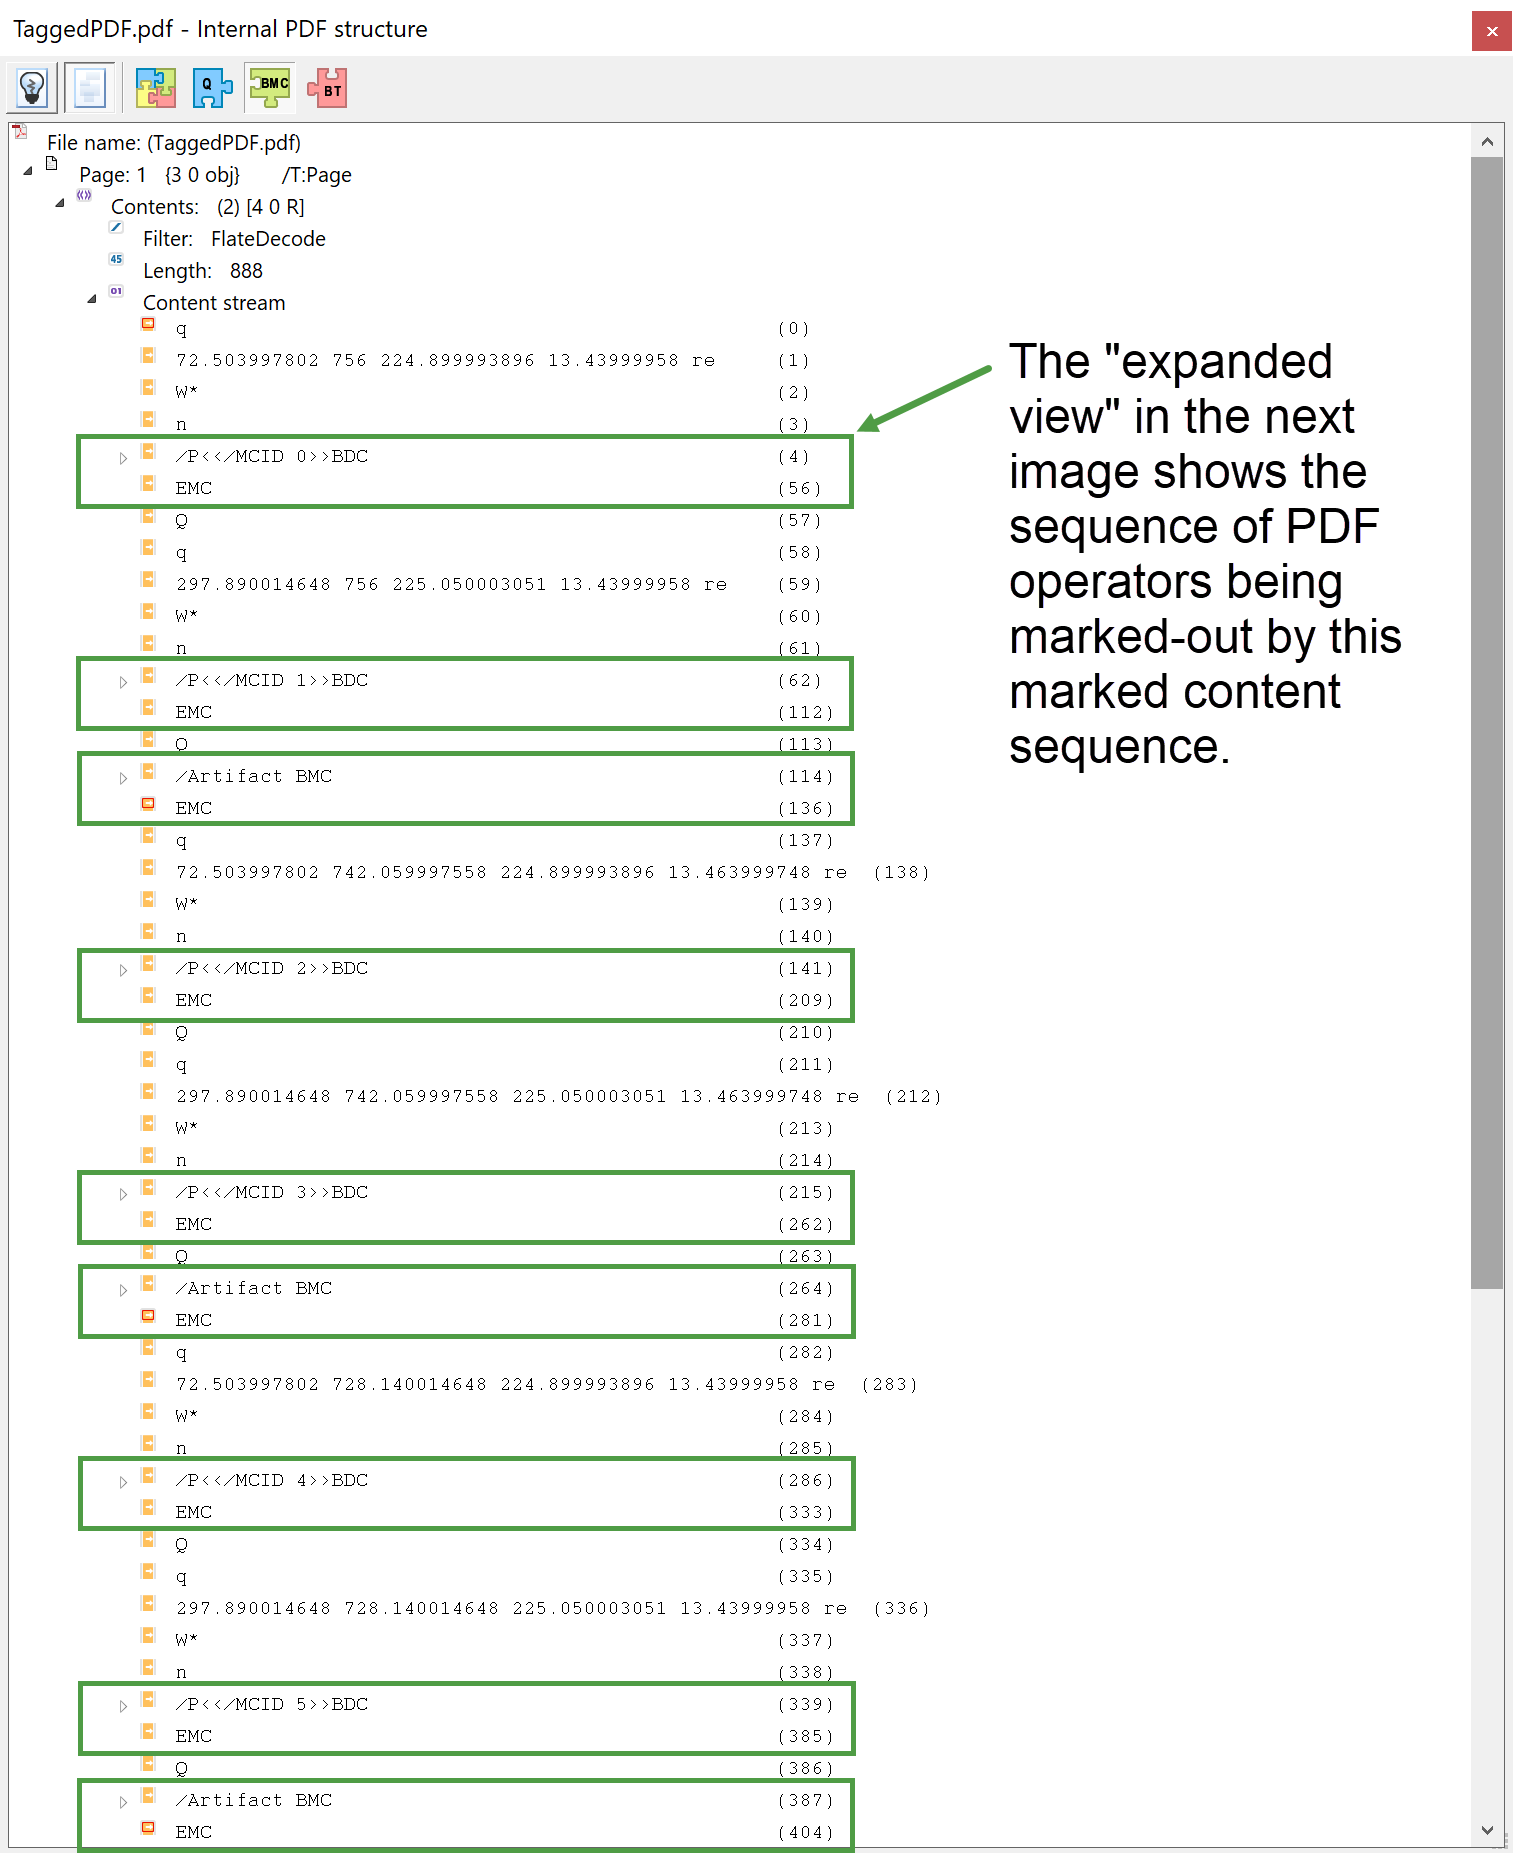 Image showing marked content sequences in a tagged PDF content stream viewed in Adobe Acrobat Pro DC